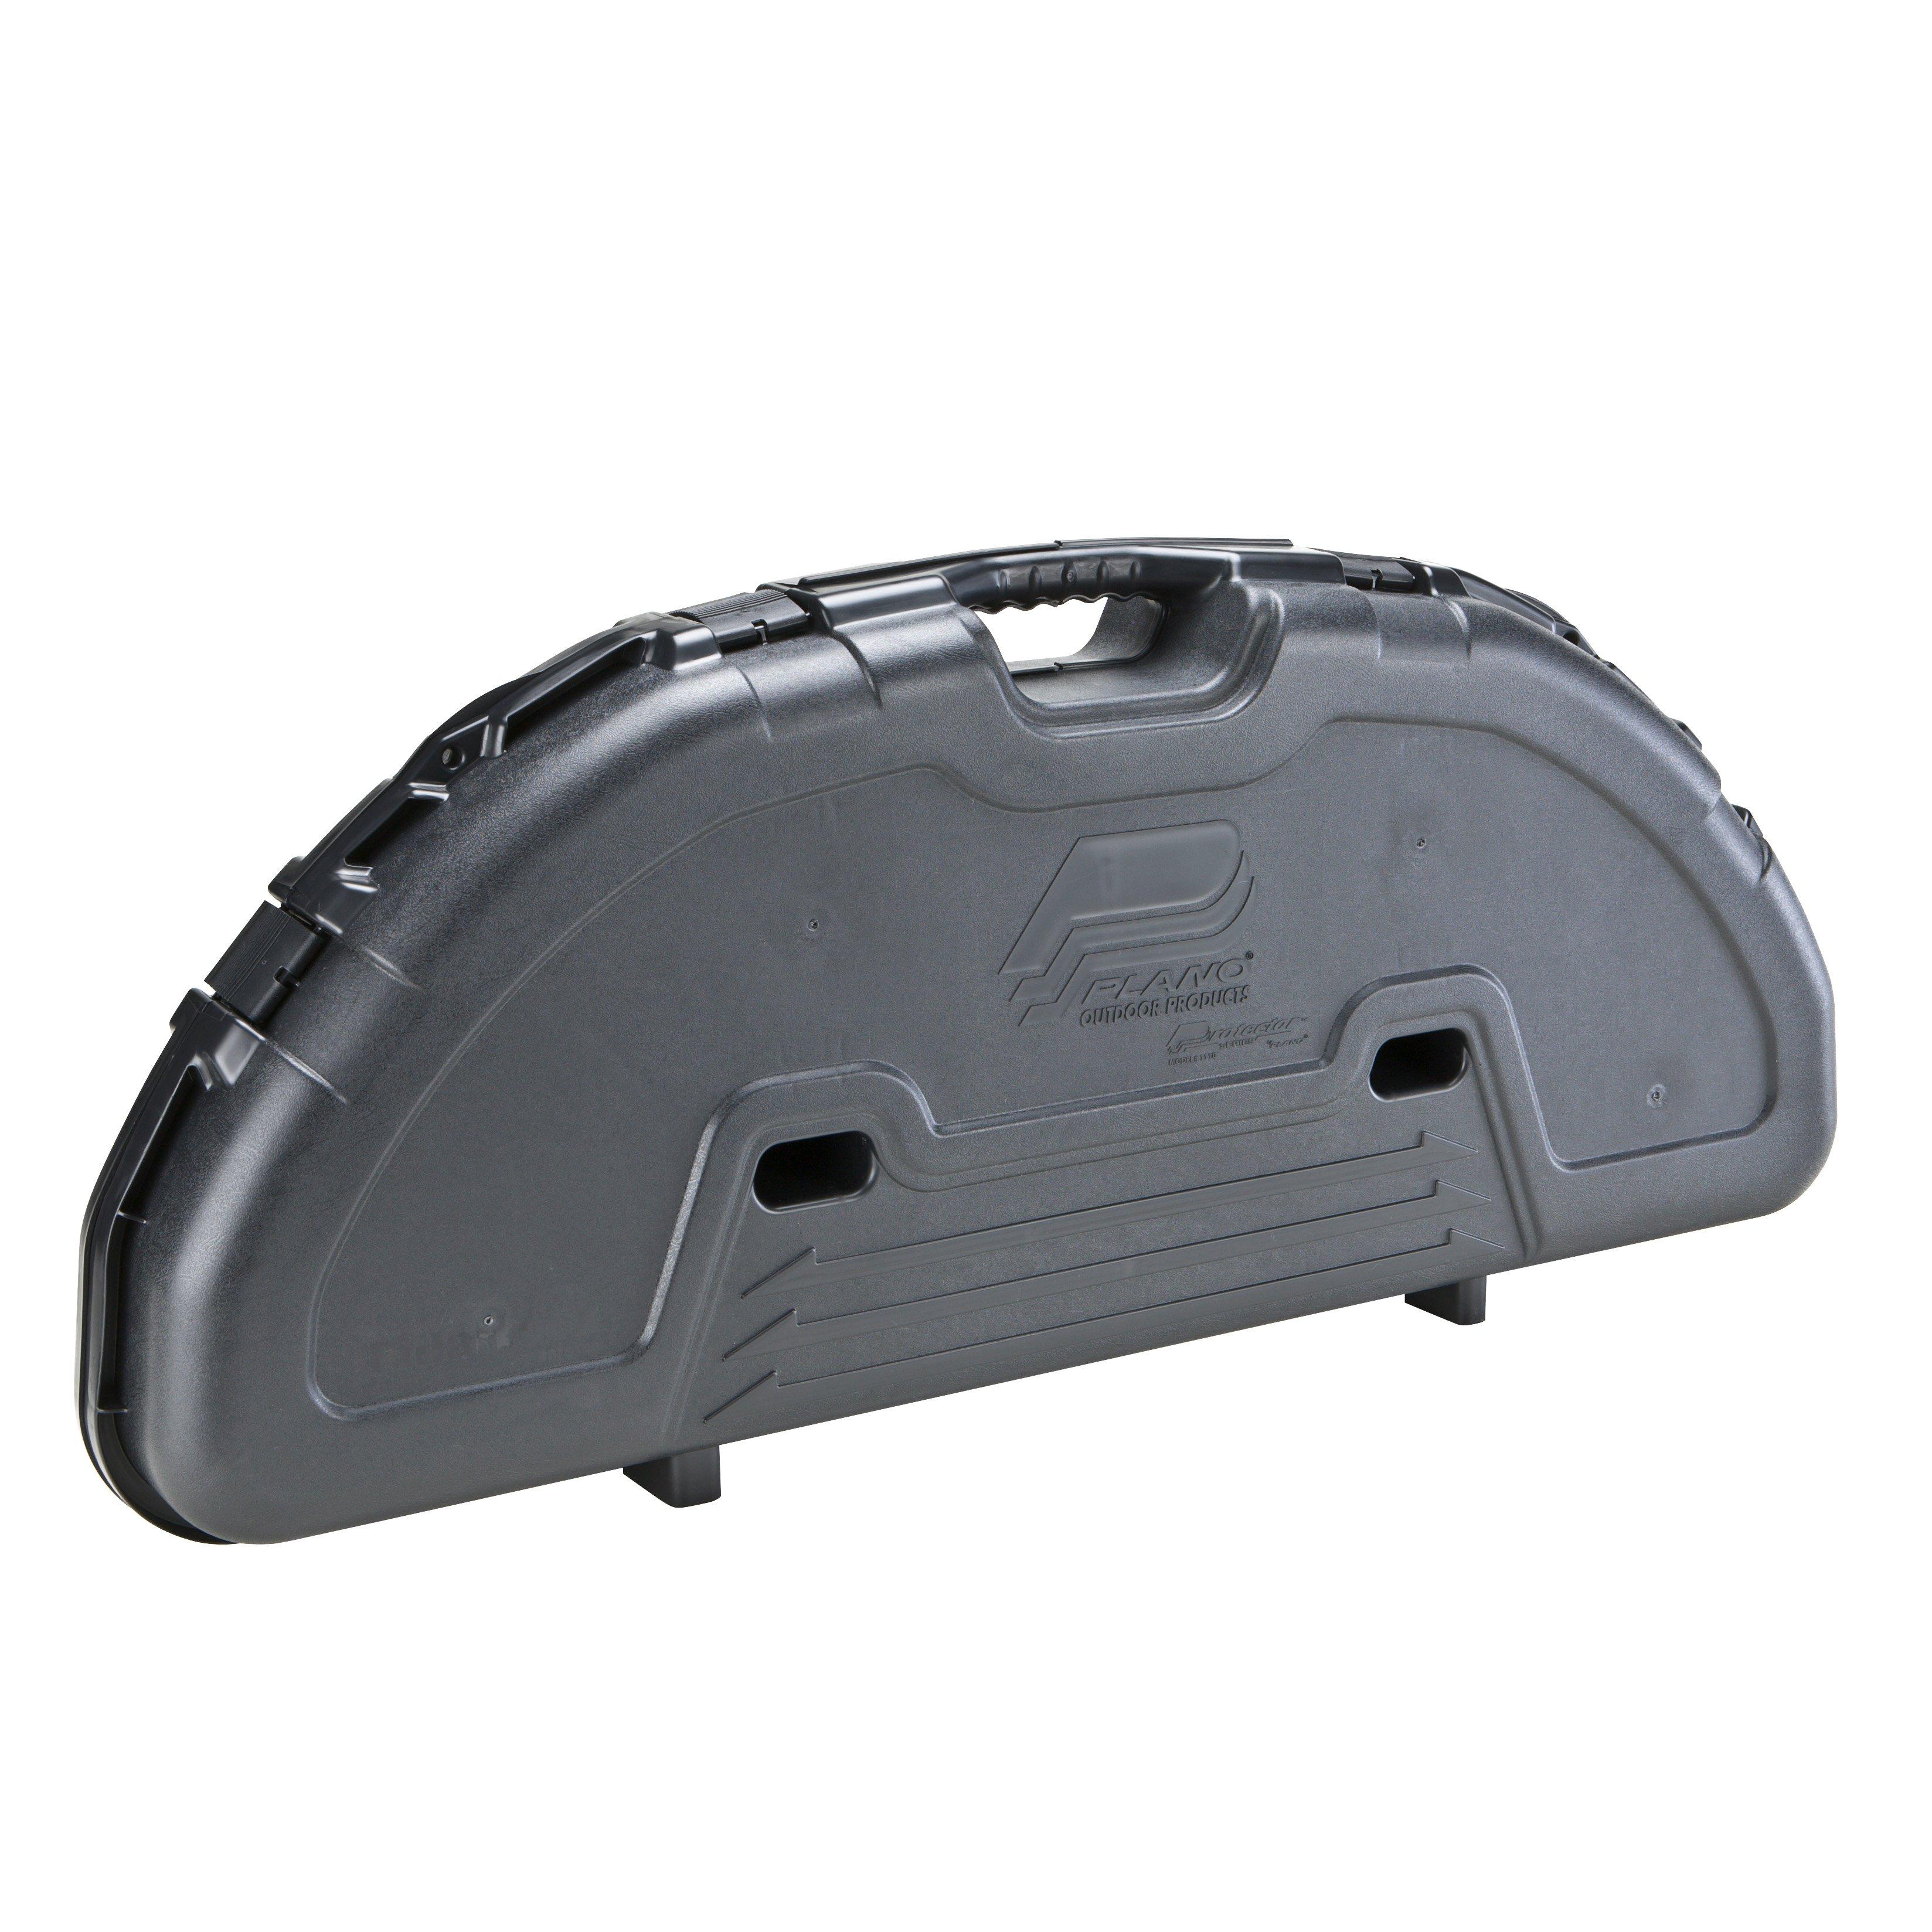 Plano Protector Series® Compact Bow Case